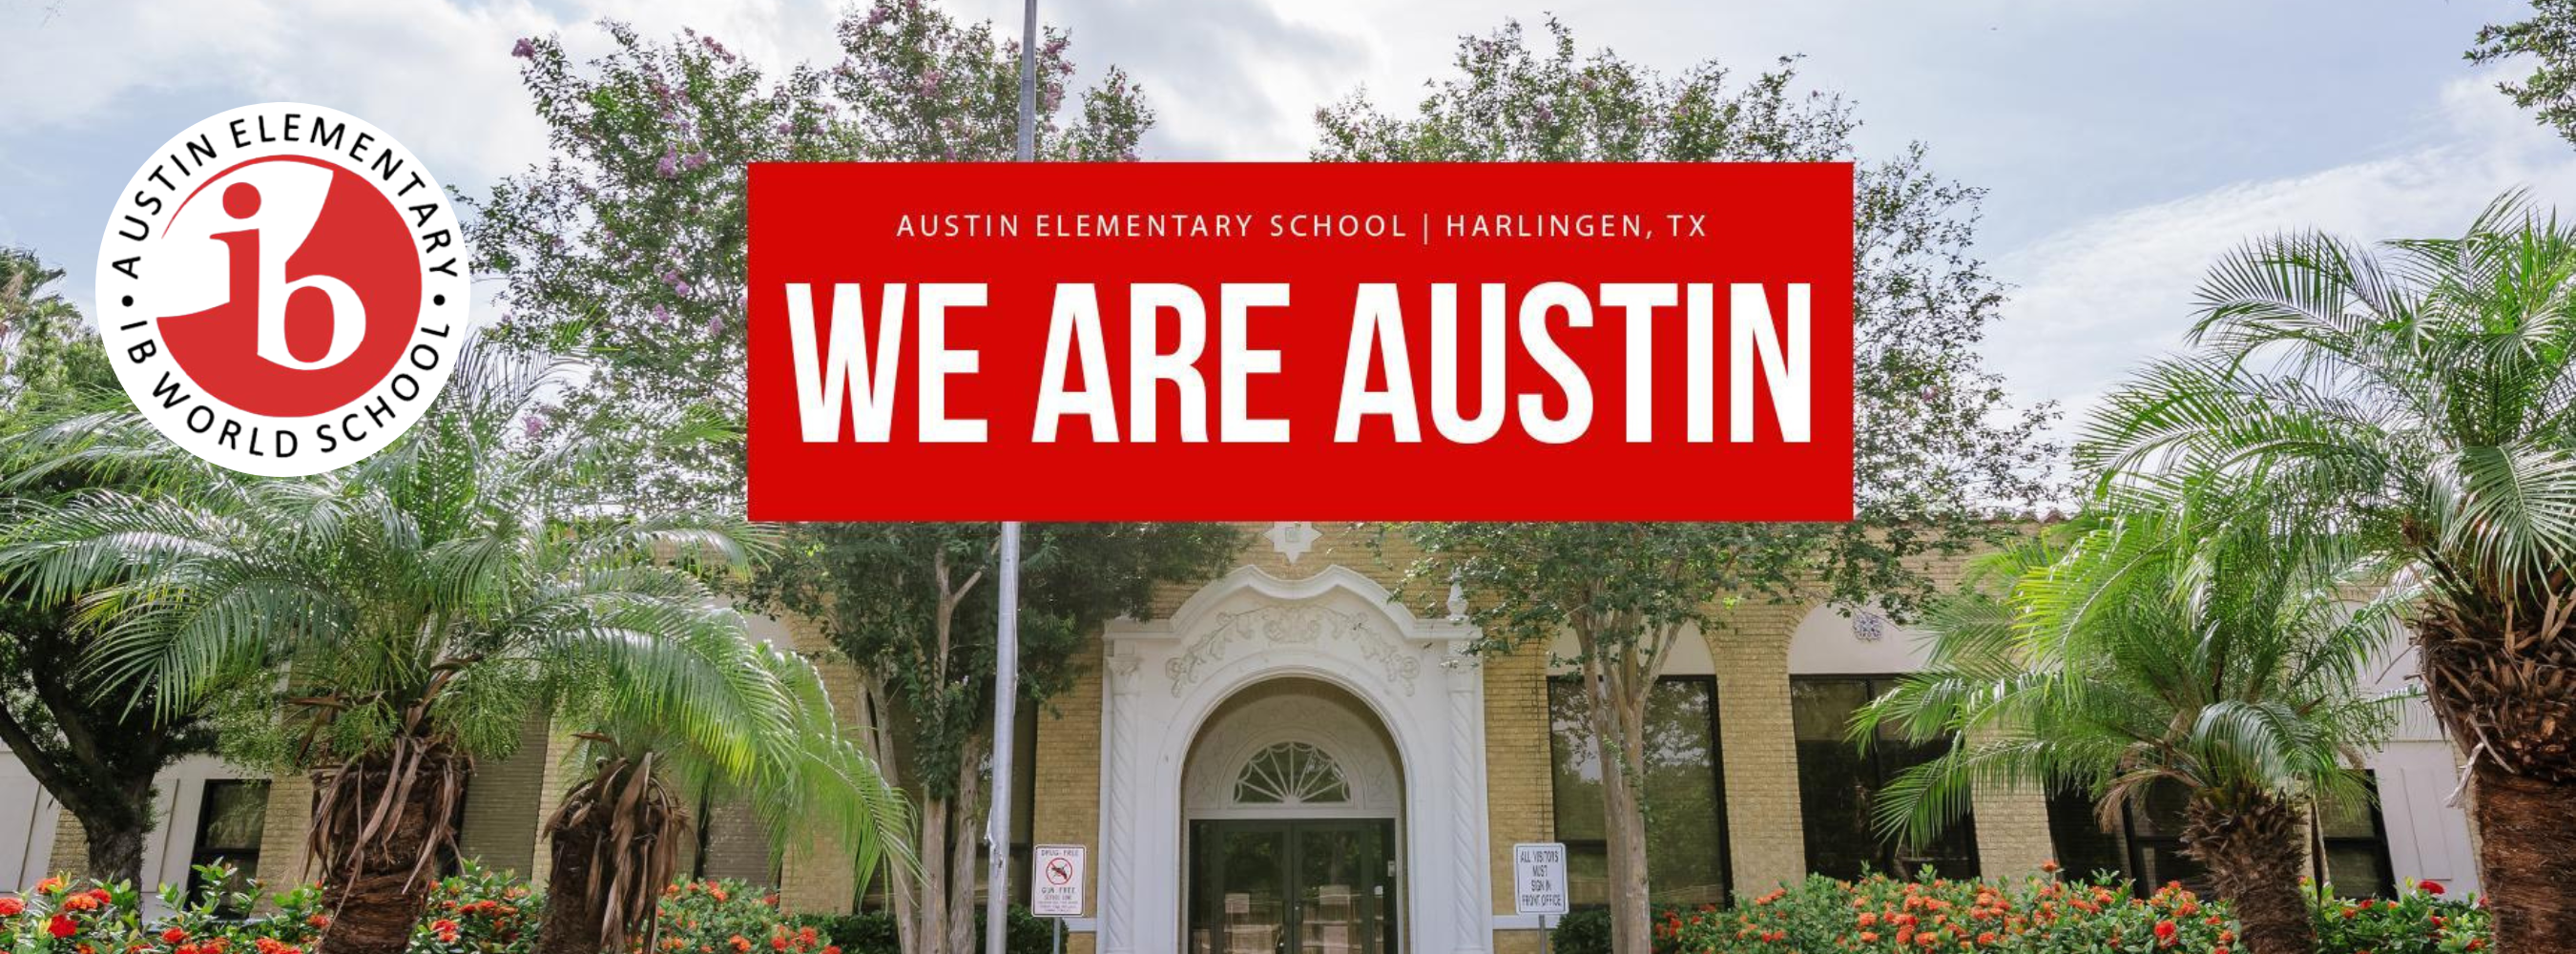 We are Austin Home page